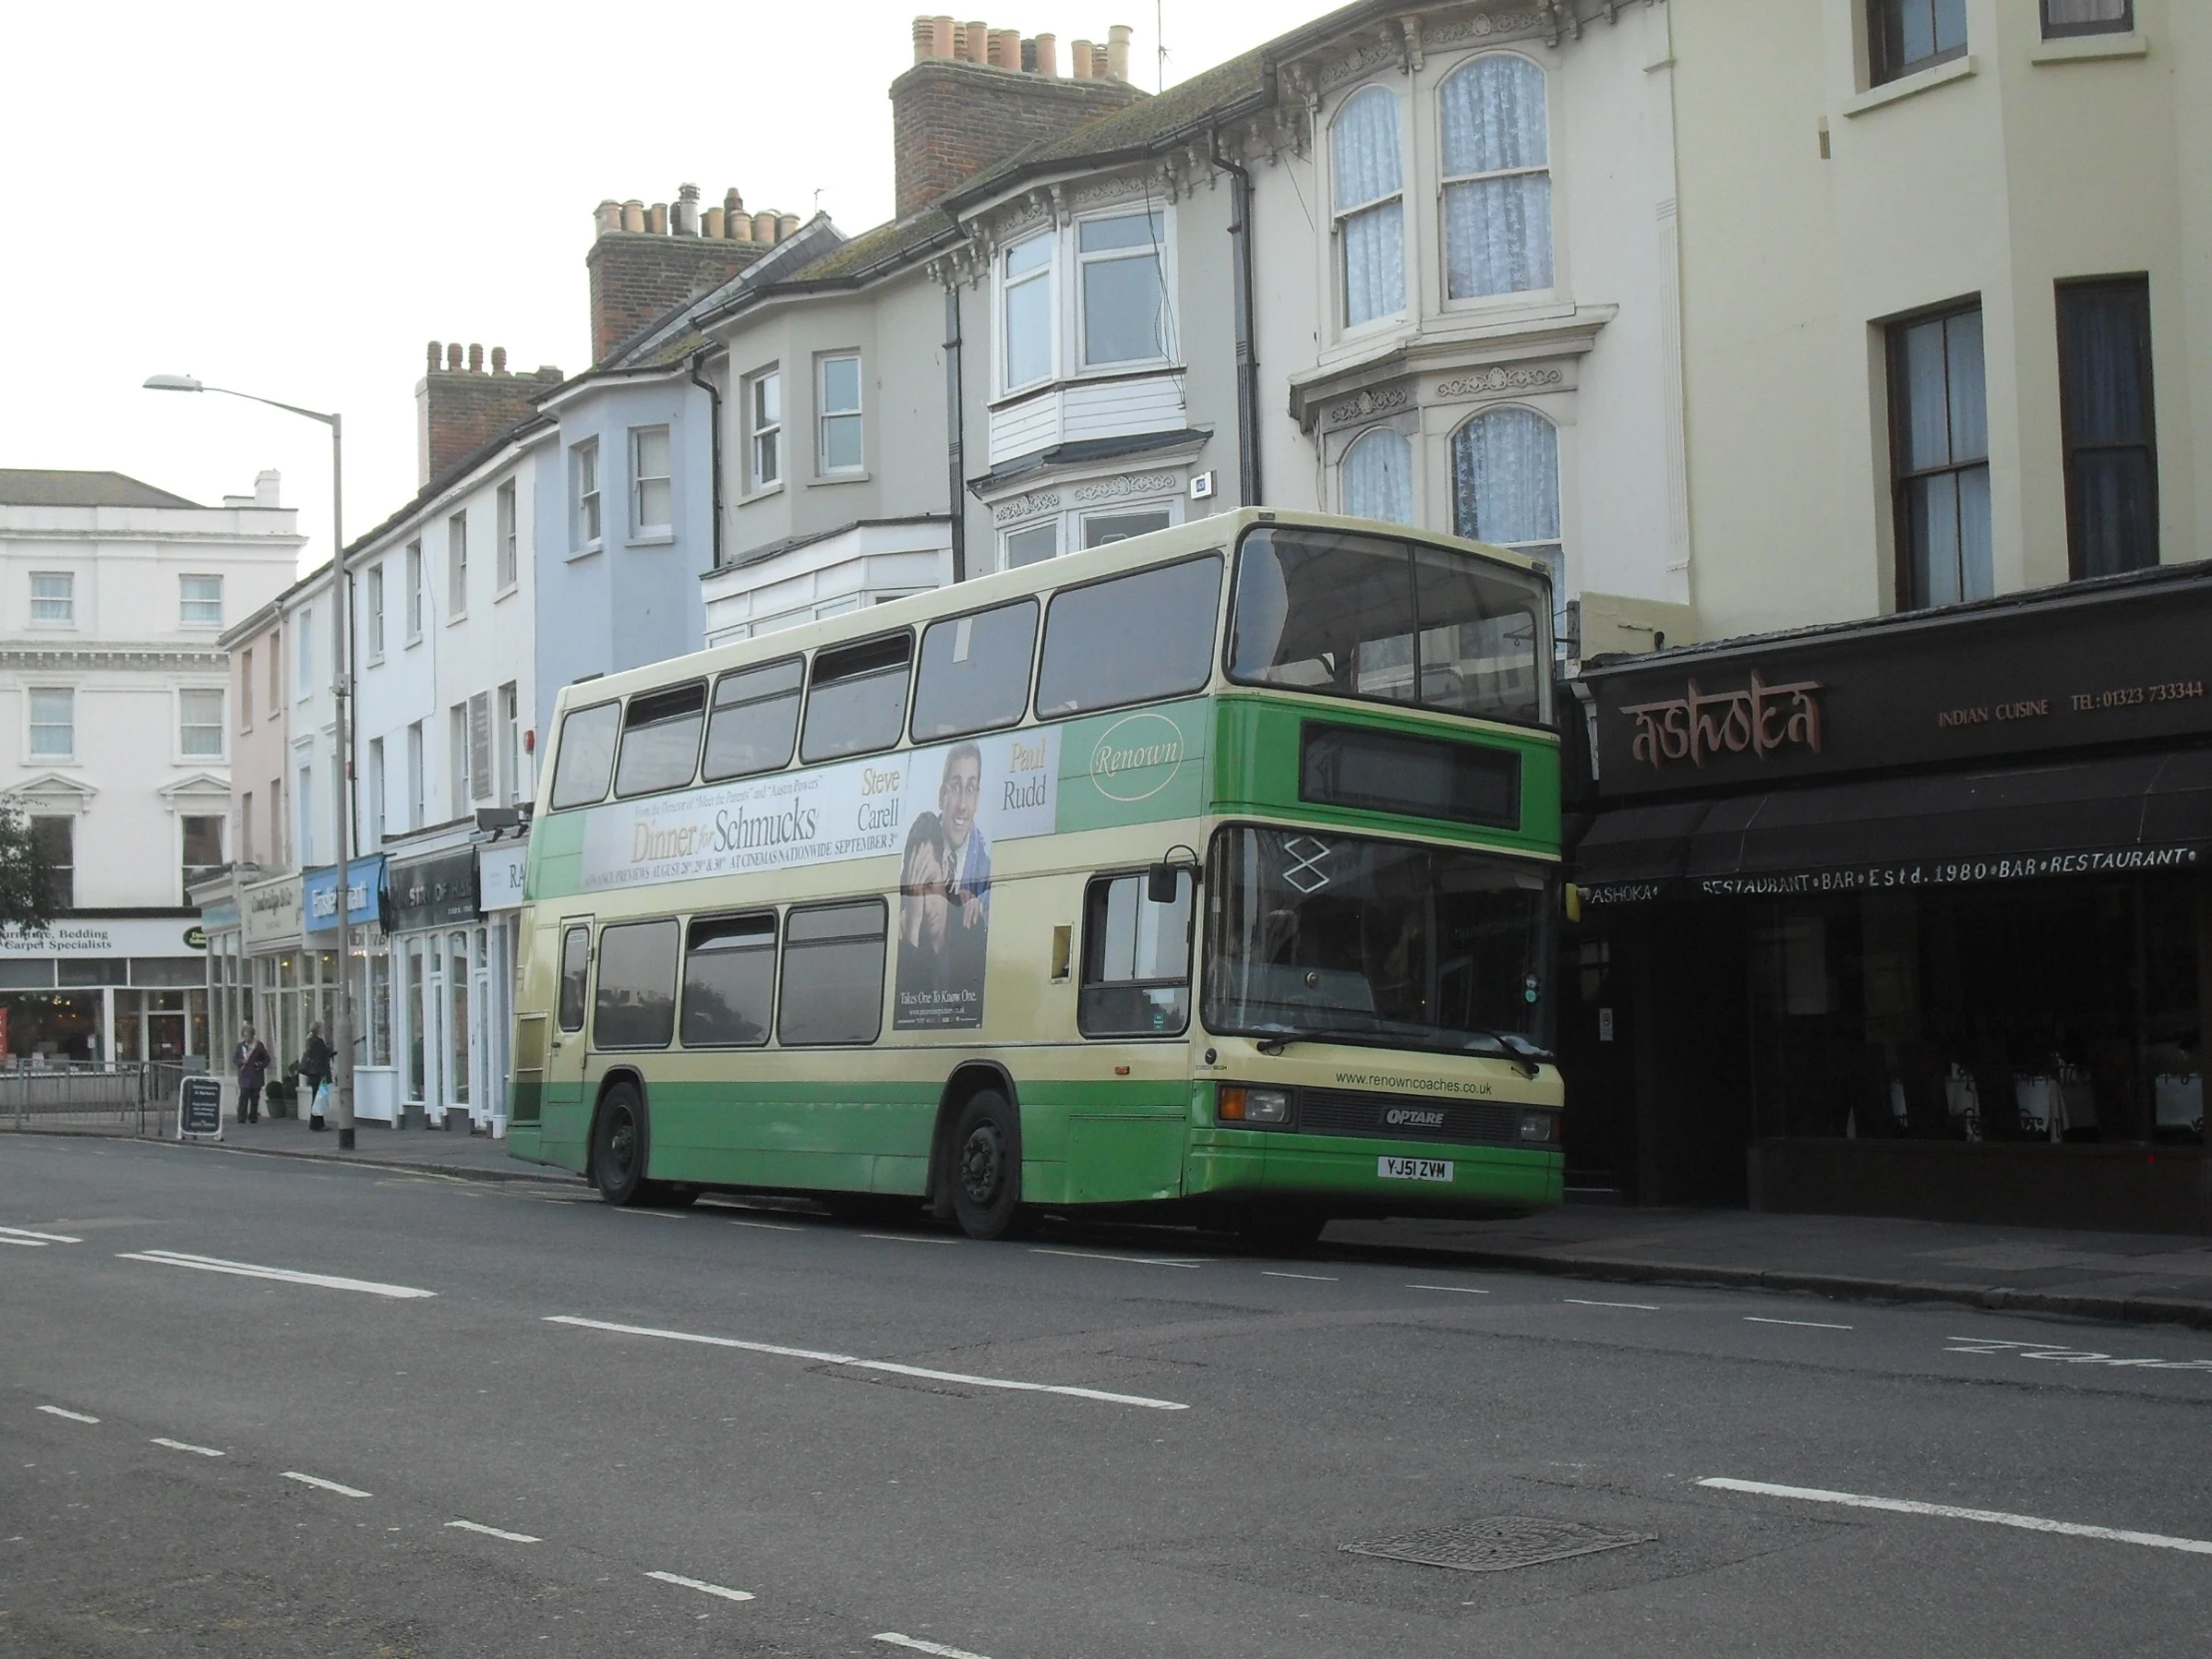 a green double decker bus parked in front of a white building